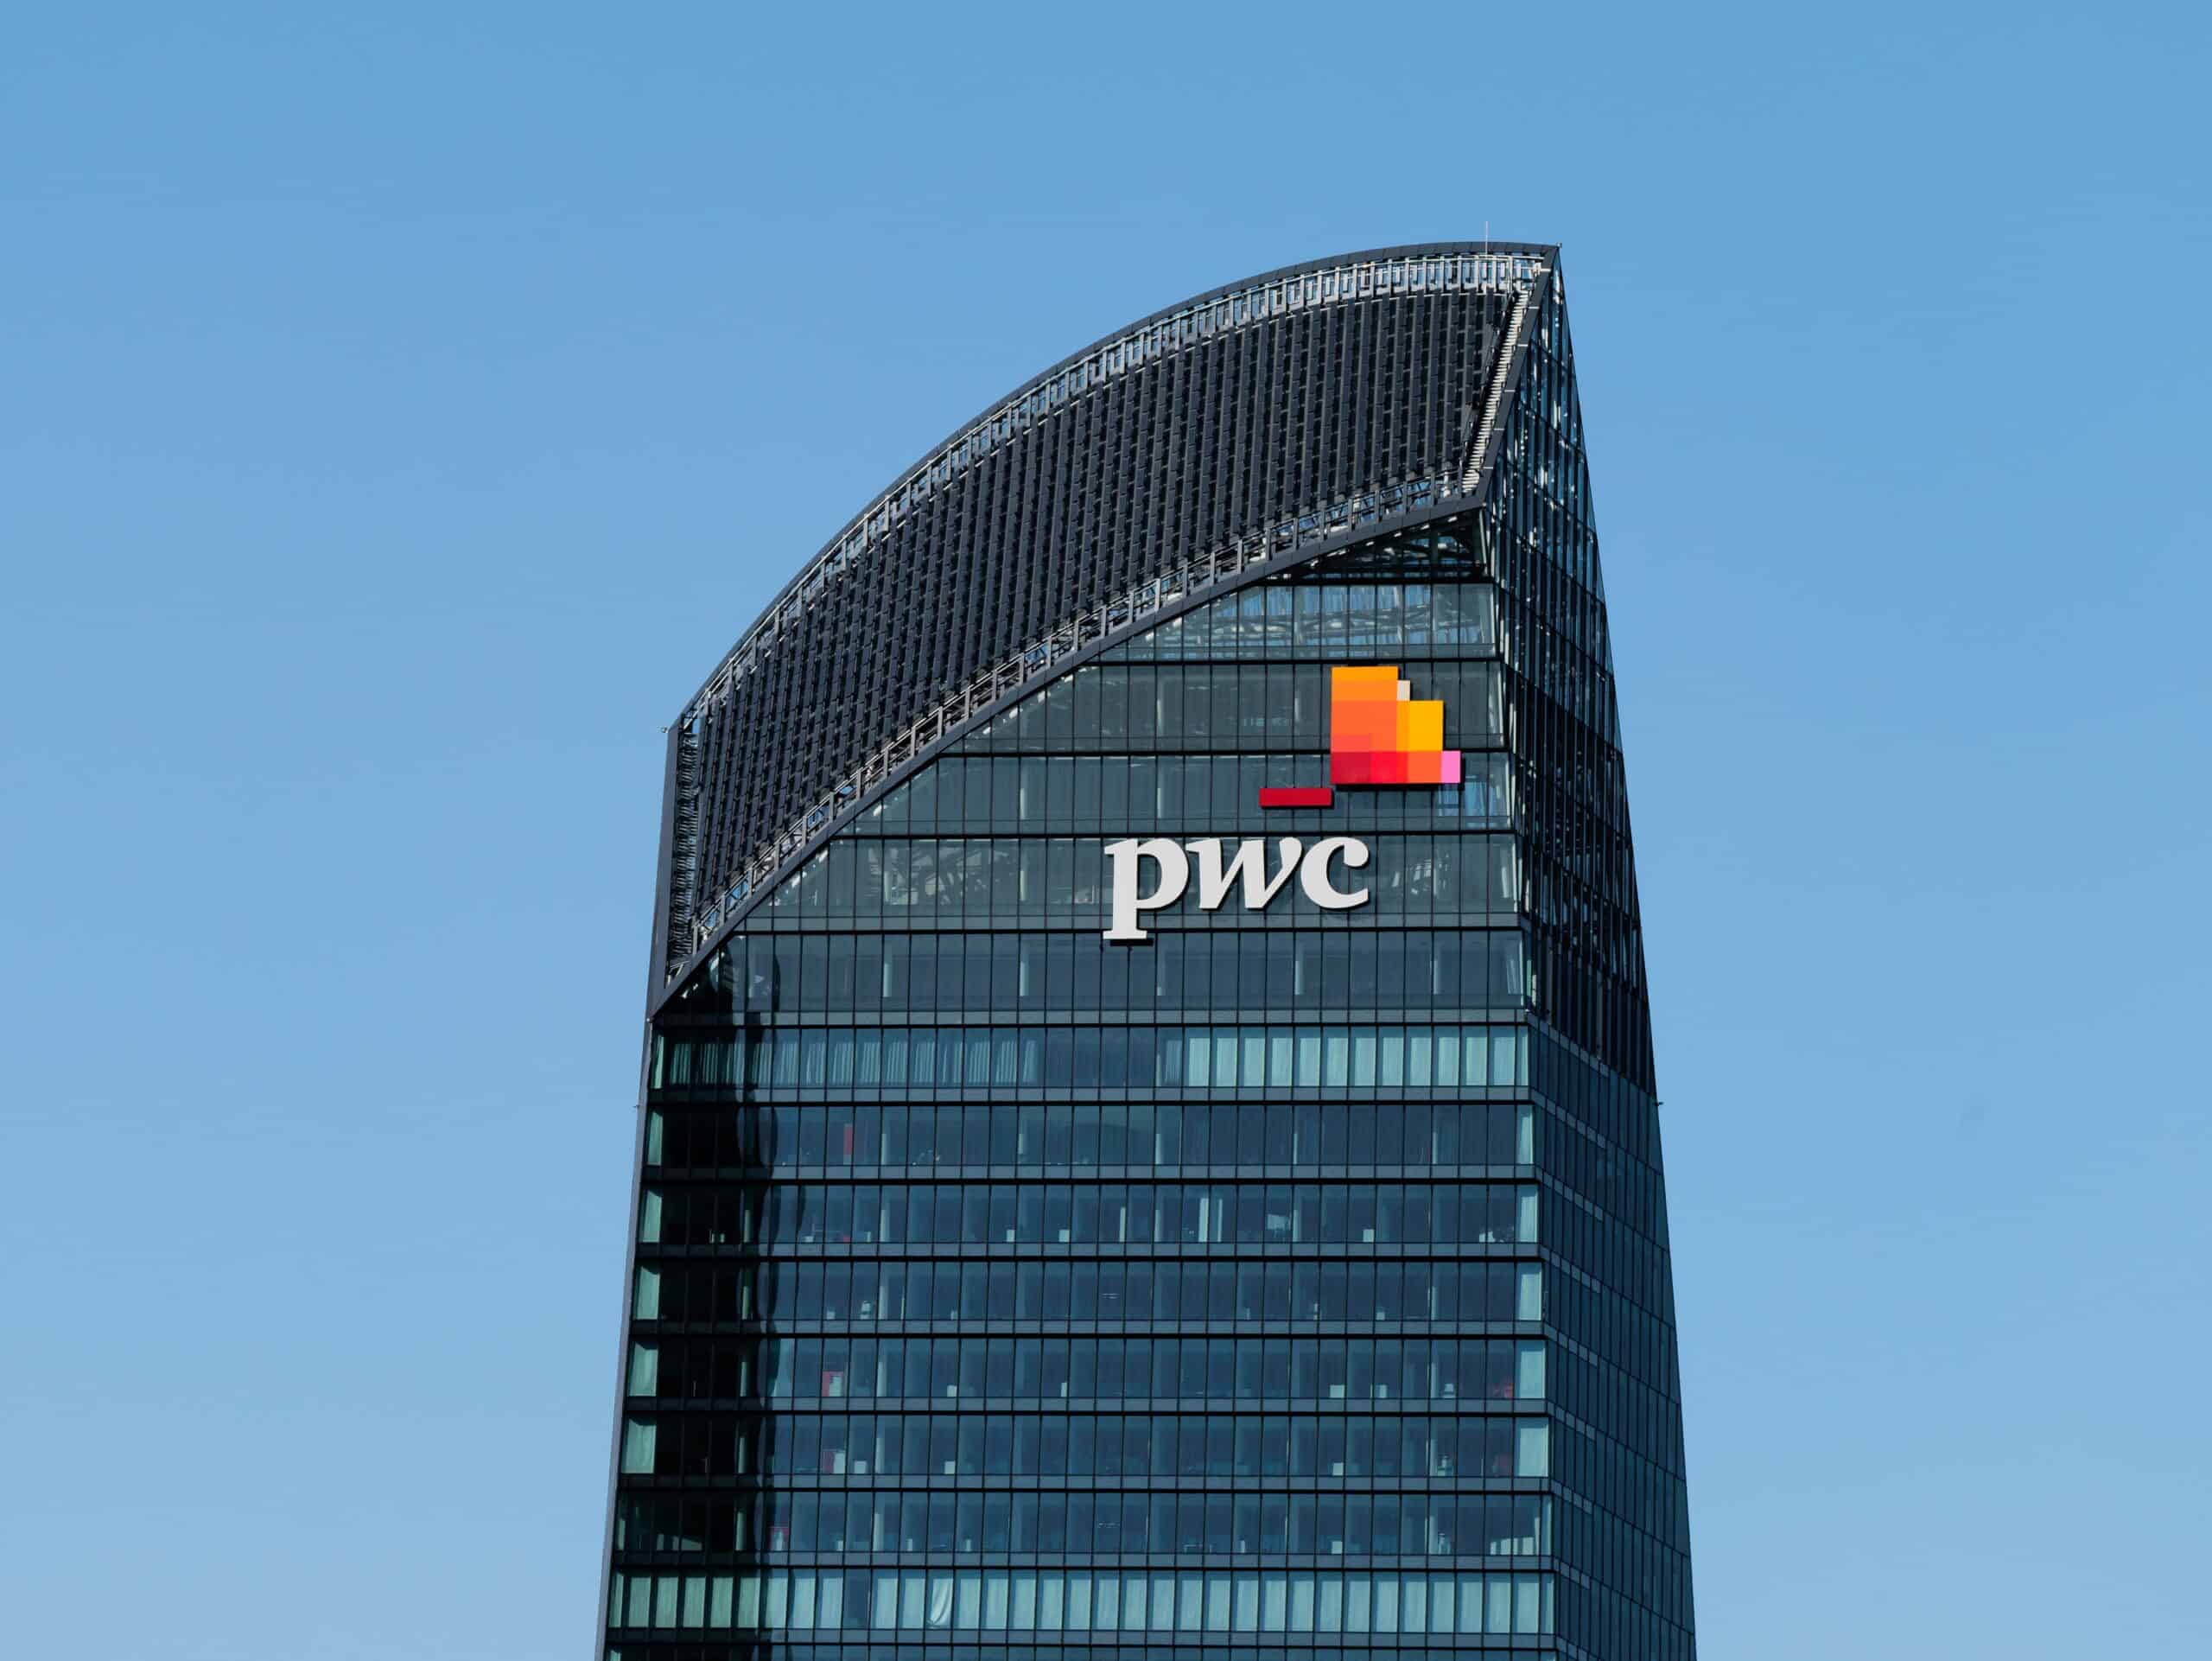 PwC Off Campus Drive